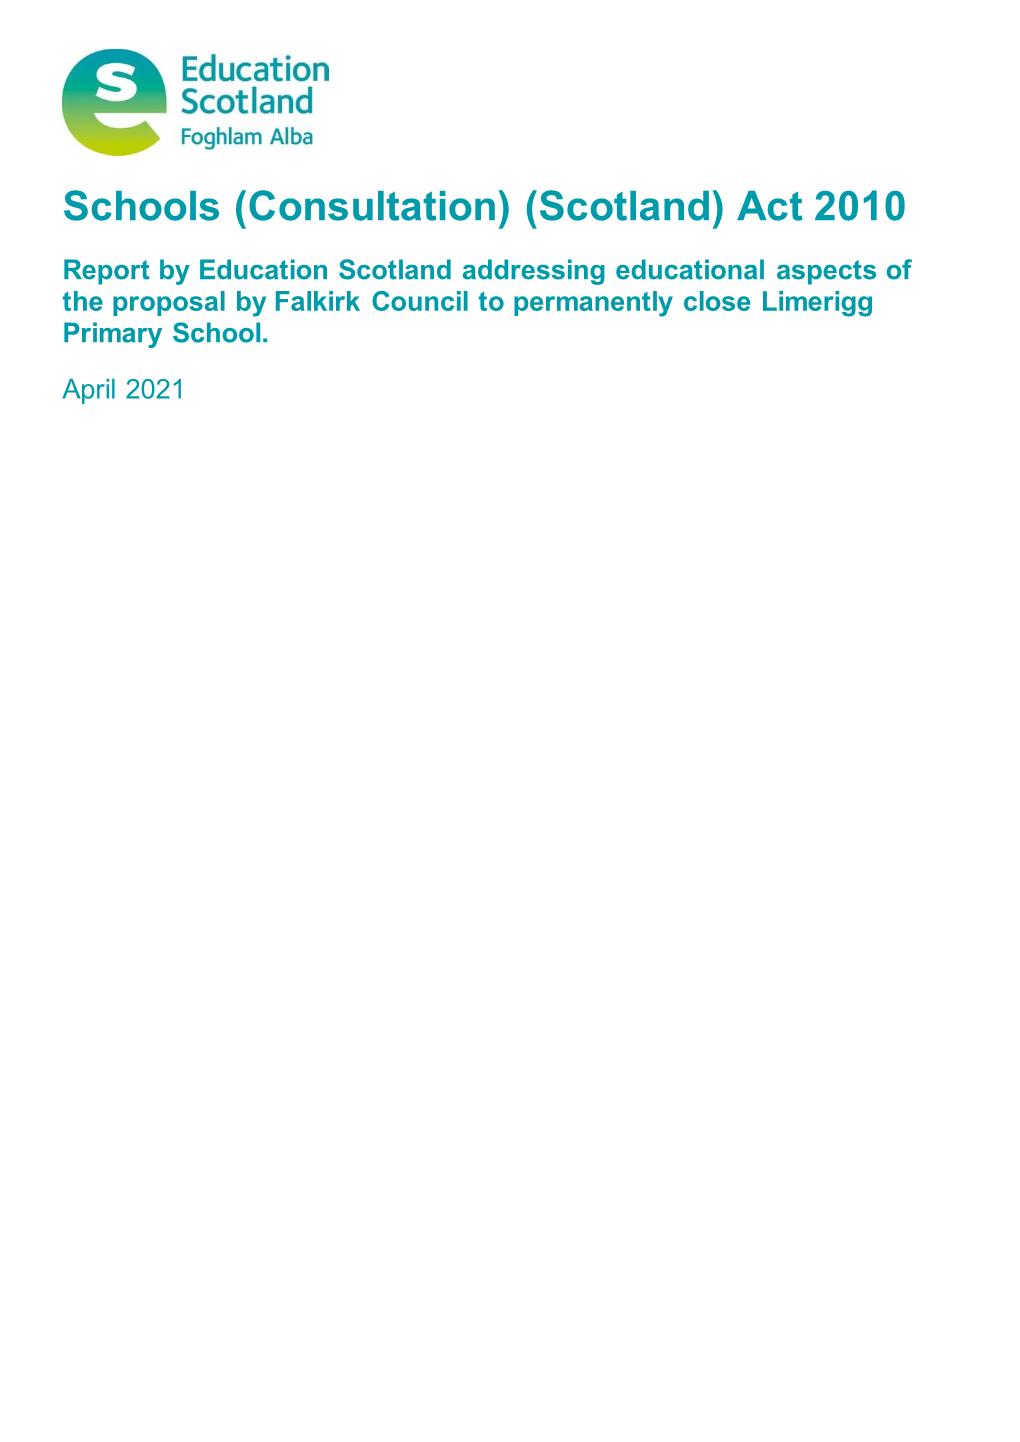 Report by Education Scotland Addressing Educational Aspects of the Proposal by Falkirk Council to Permanently Close Limerigg Primary School